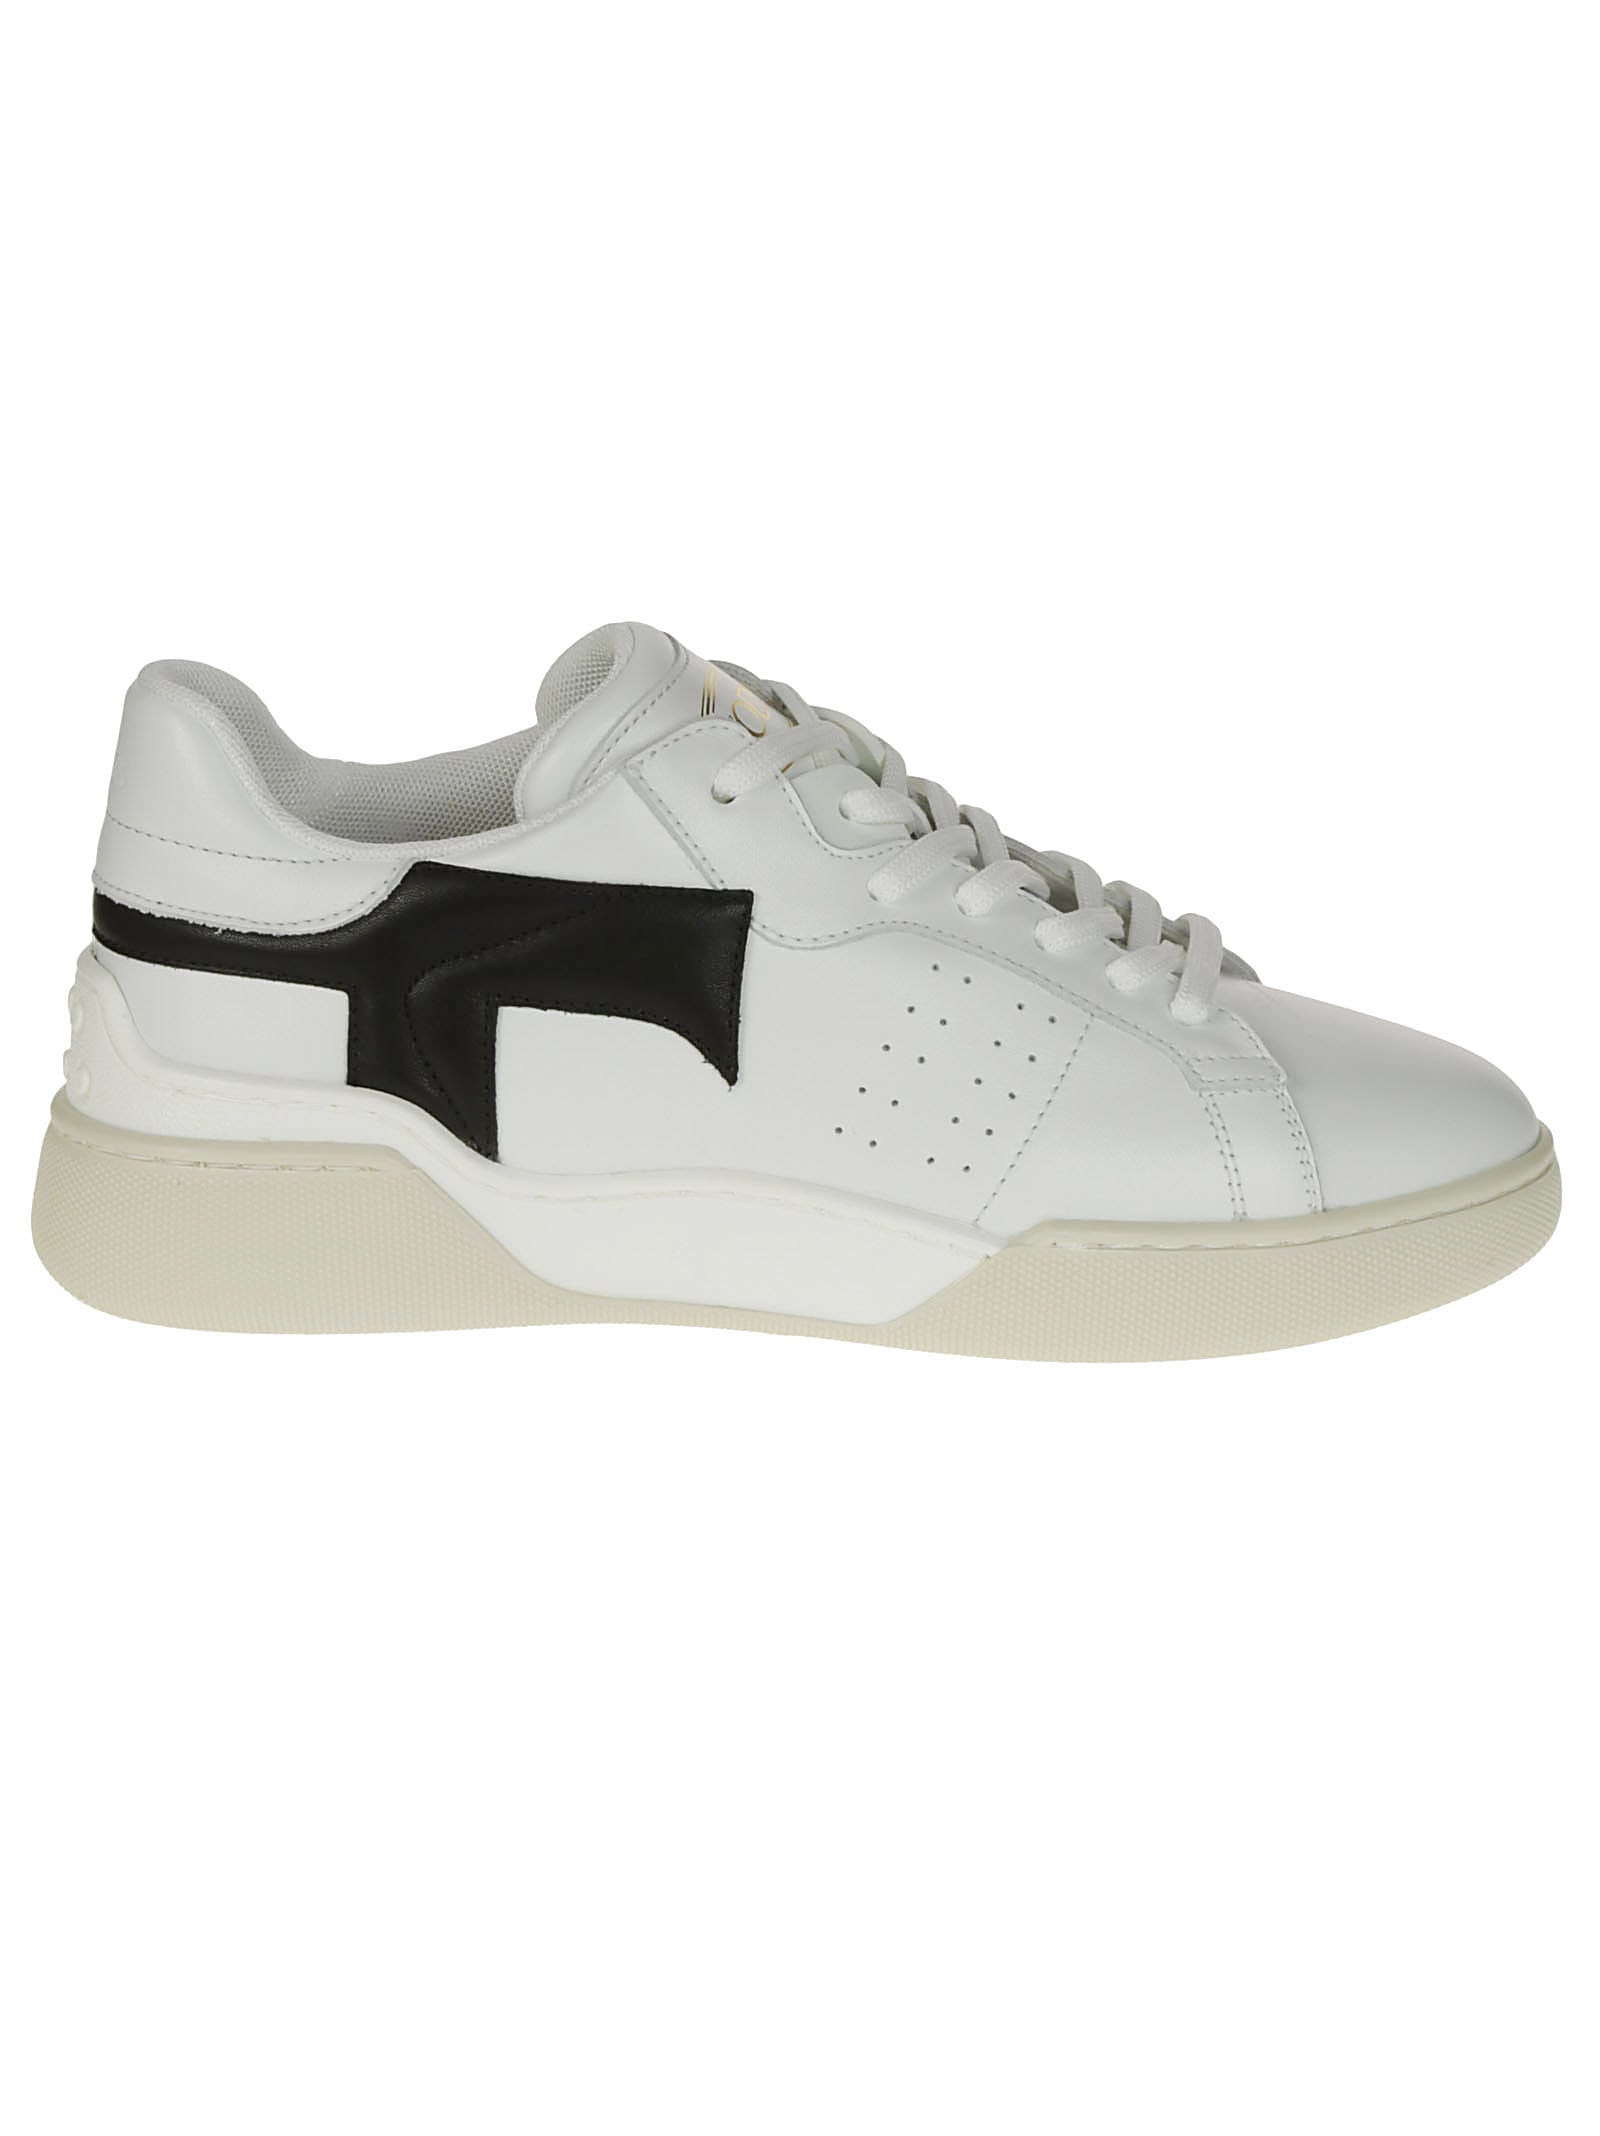 Tods Side Perforated Detail Lace-up Sneakers